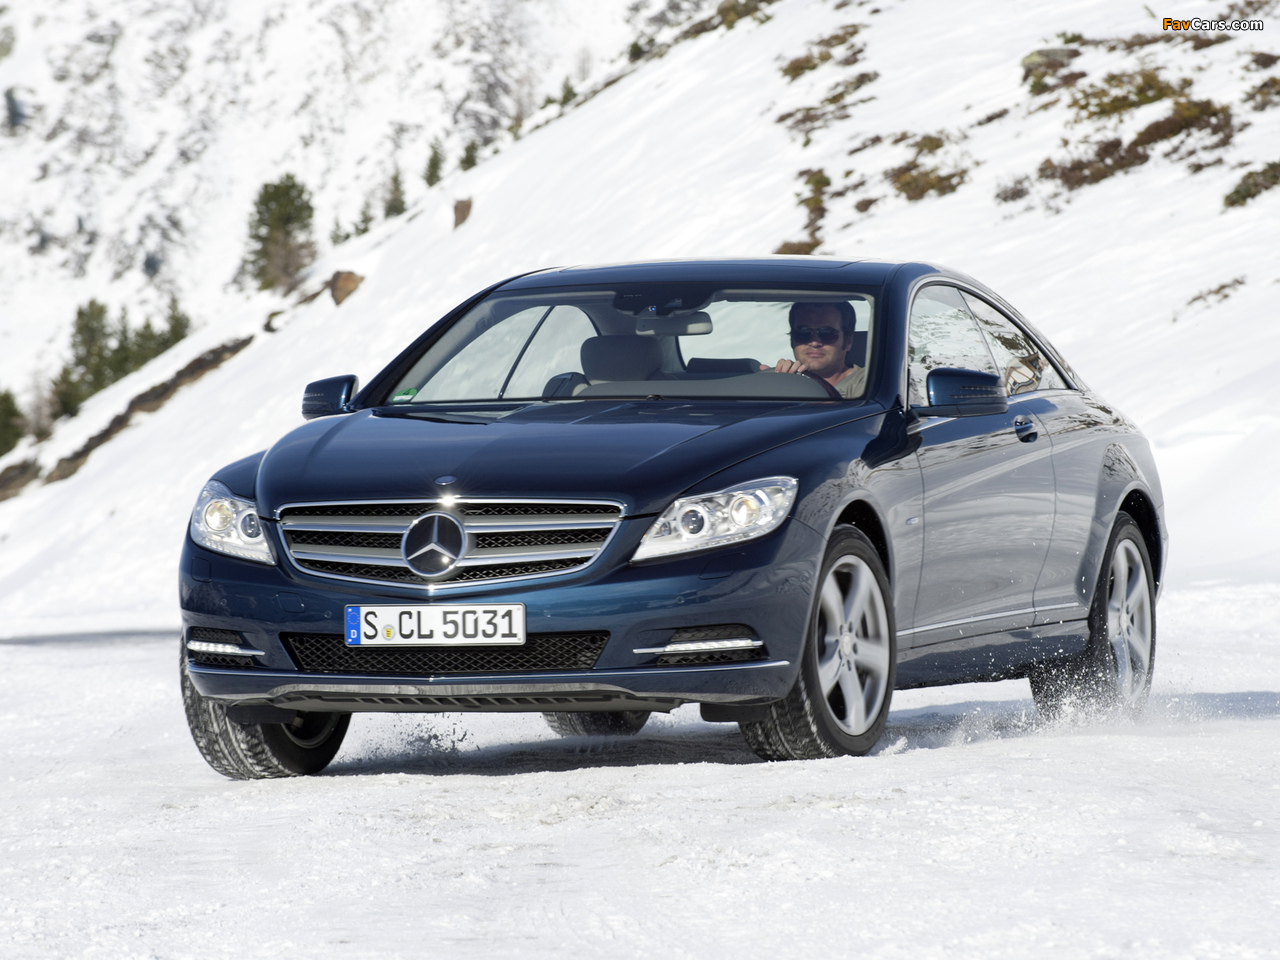 Mercedes-Benz CL 500 4MATIC (S216) 2010 pictures (1280 x 960)